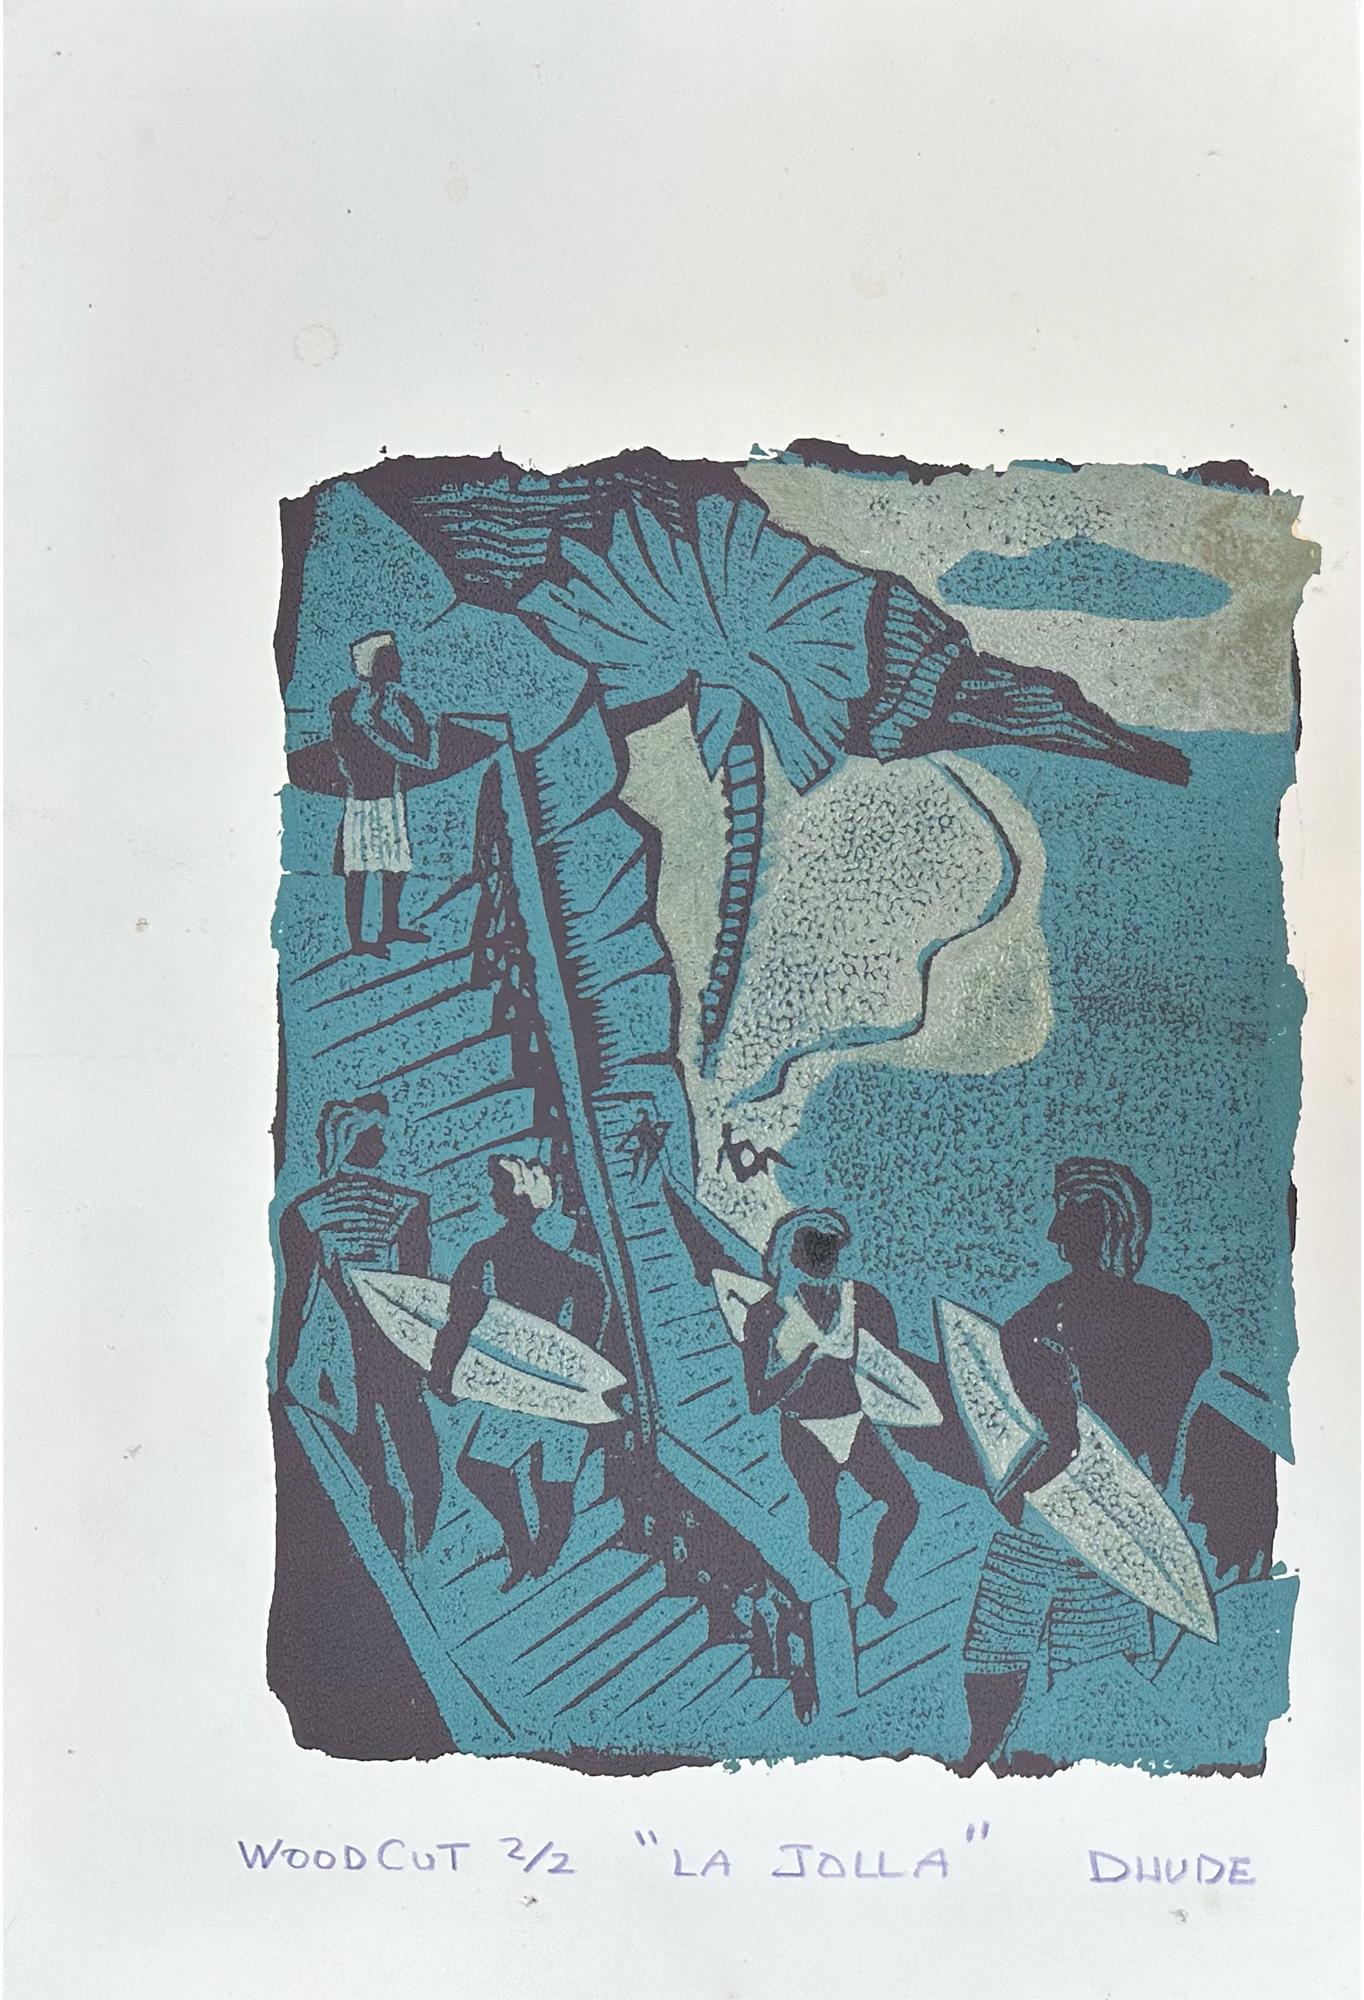 La Jolla - Surfing Art - Figurative - Woodcut Print By Marc Zimmerman

Limited Edition 01/04

This masterwork is exhibited in the Zimmerman Gallery, Carmel CA.

Immerse yourself in the captivating world of surfing and ocean vibes with Marc